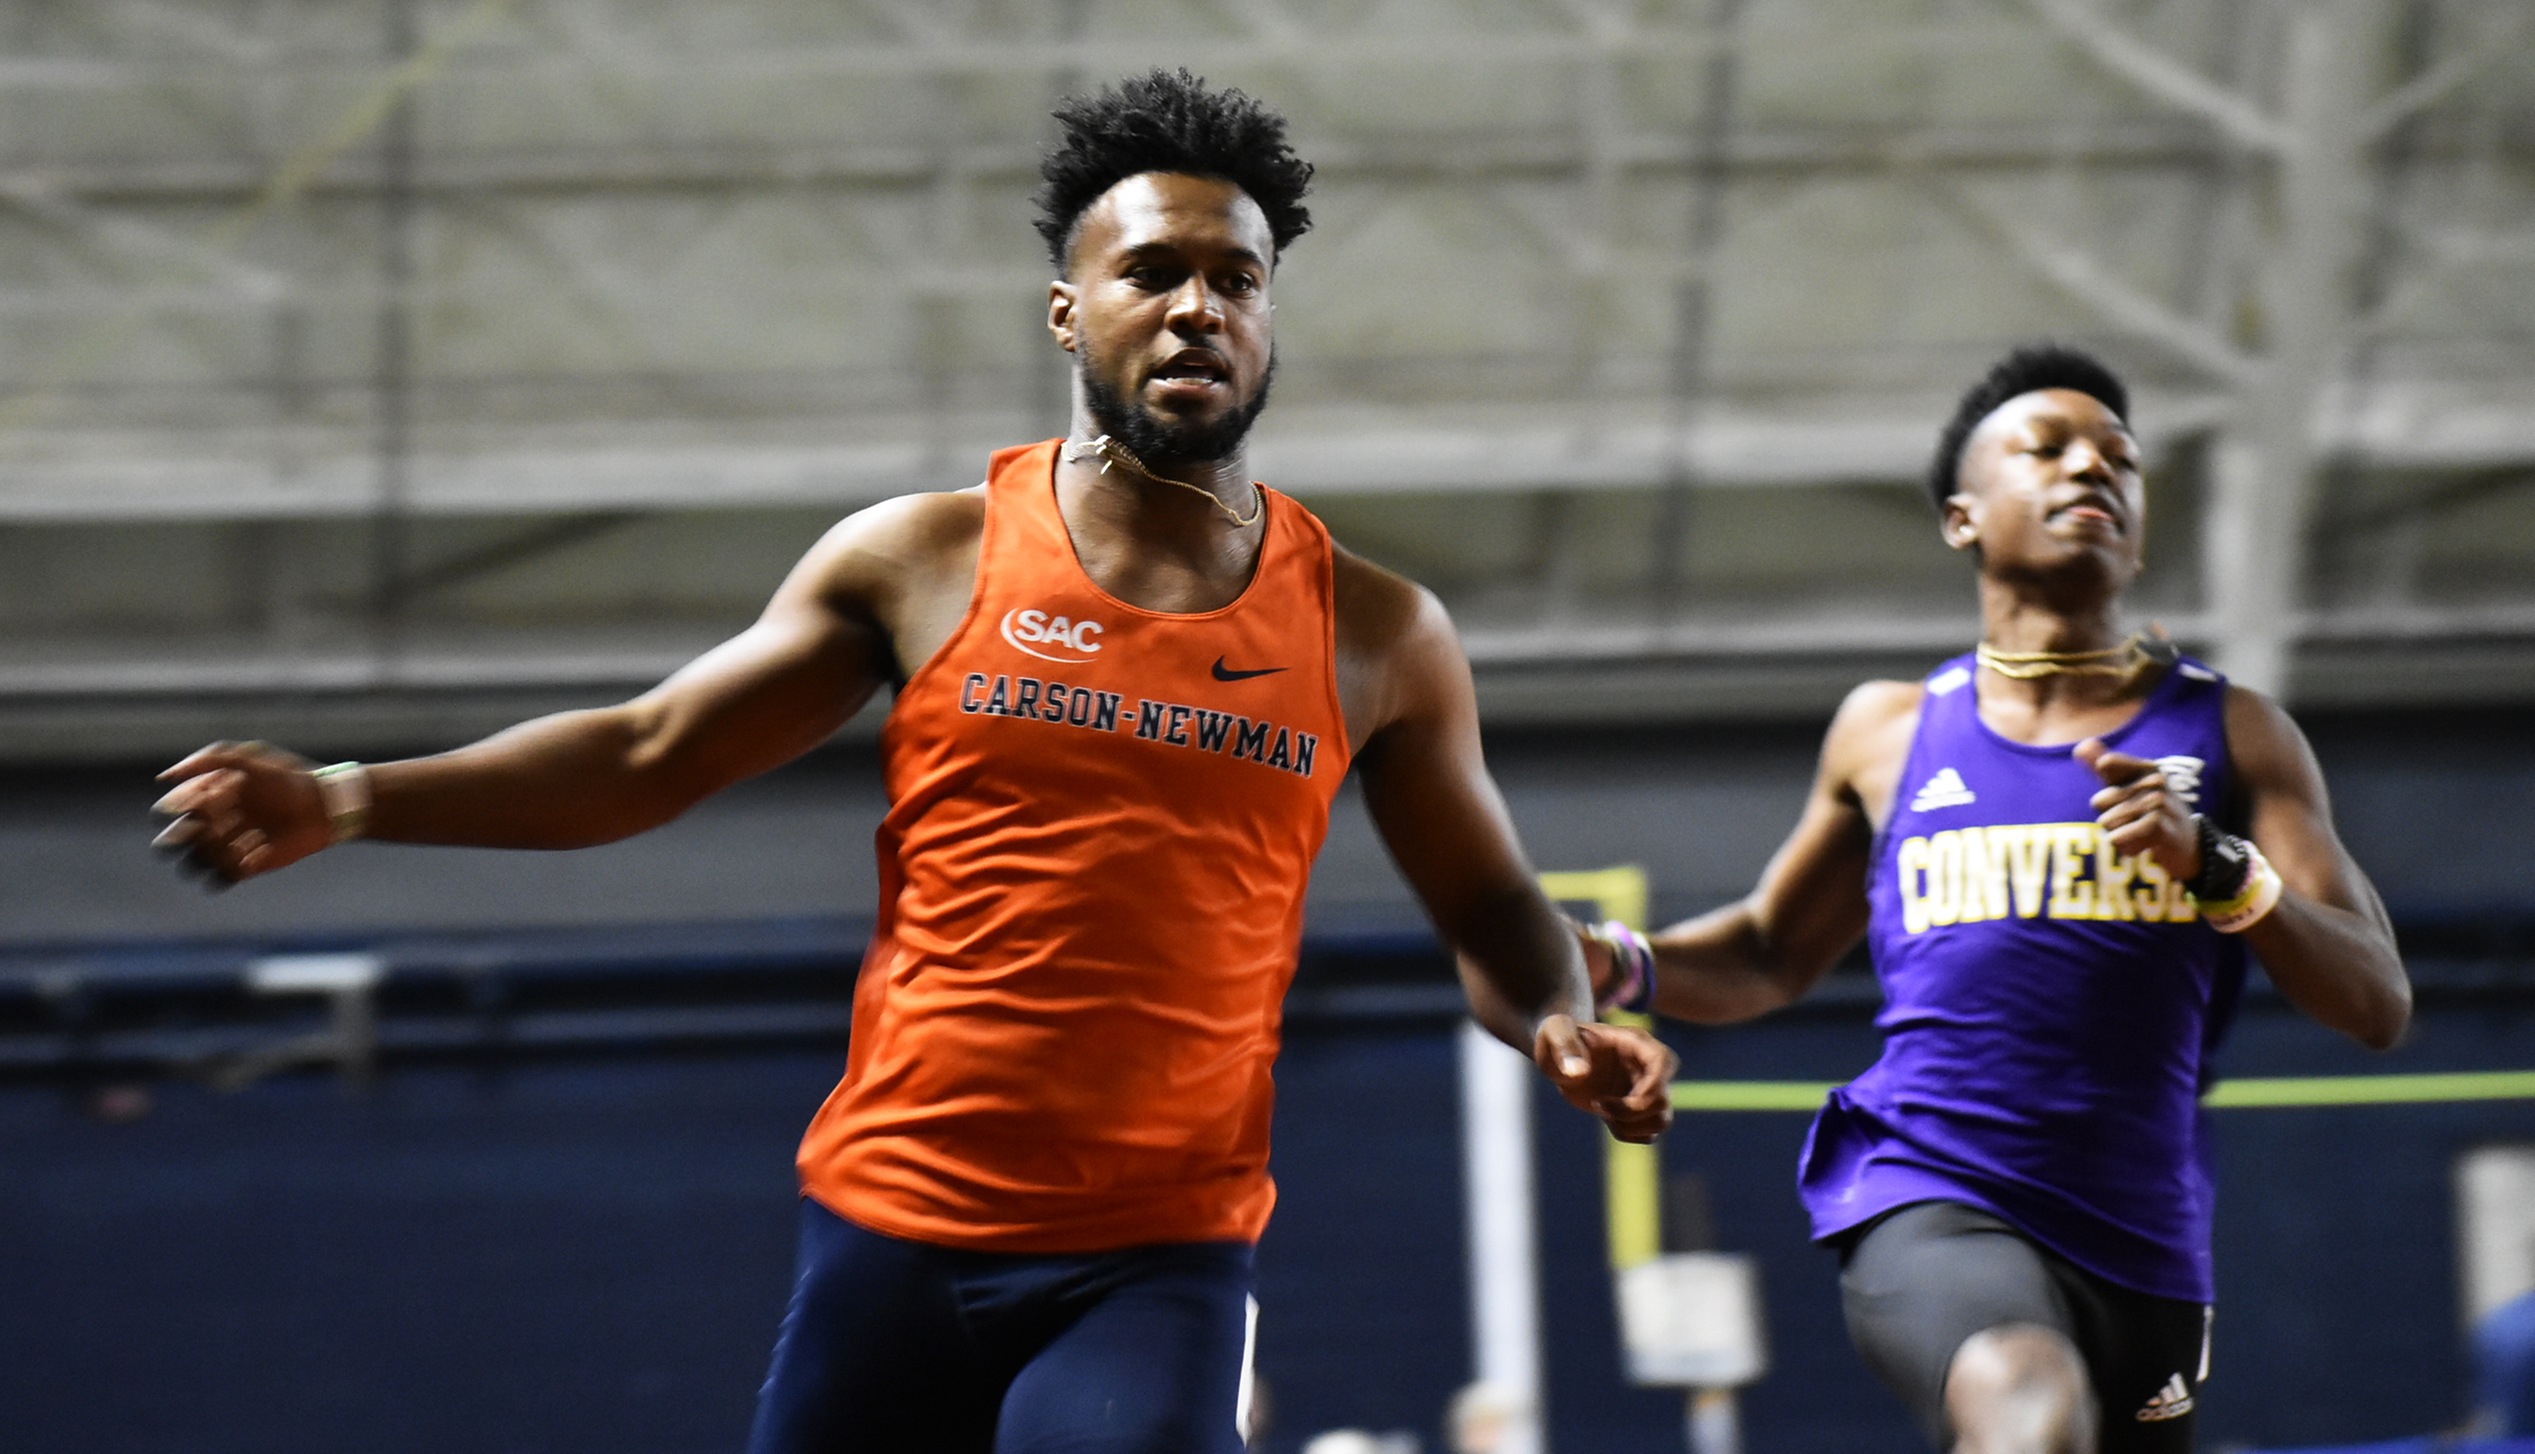 Eagles record two event wins and two school record times at Tiger Paw Invite